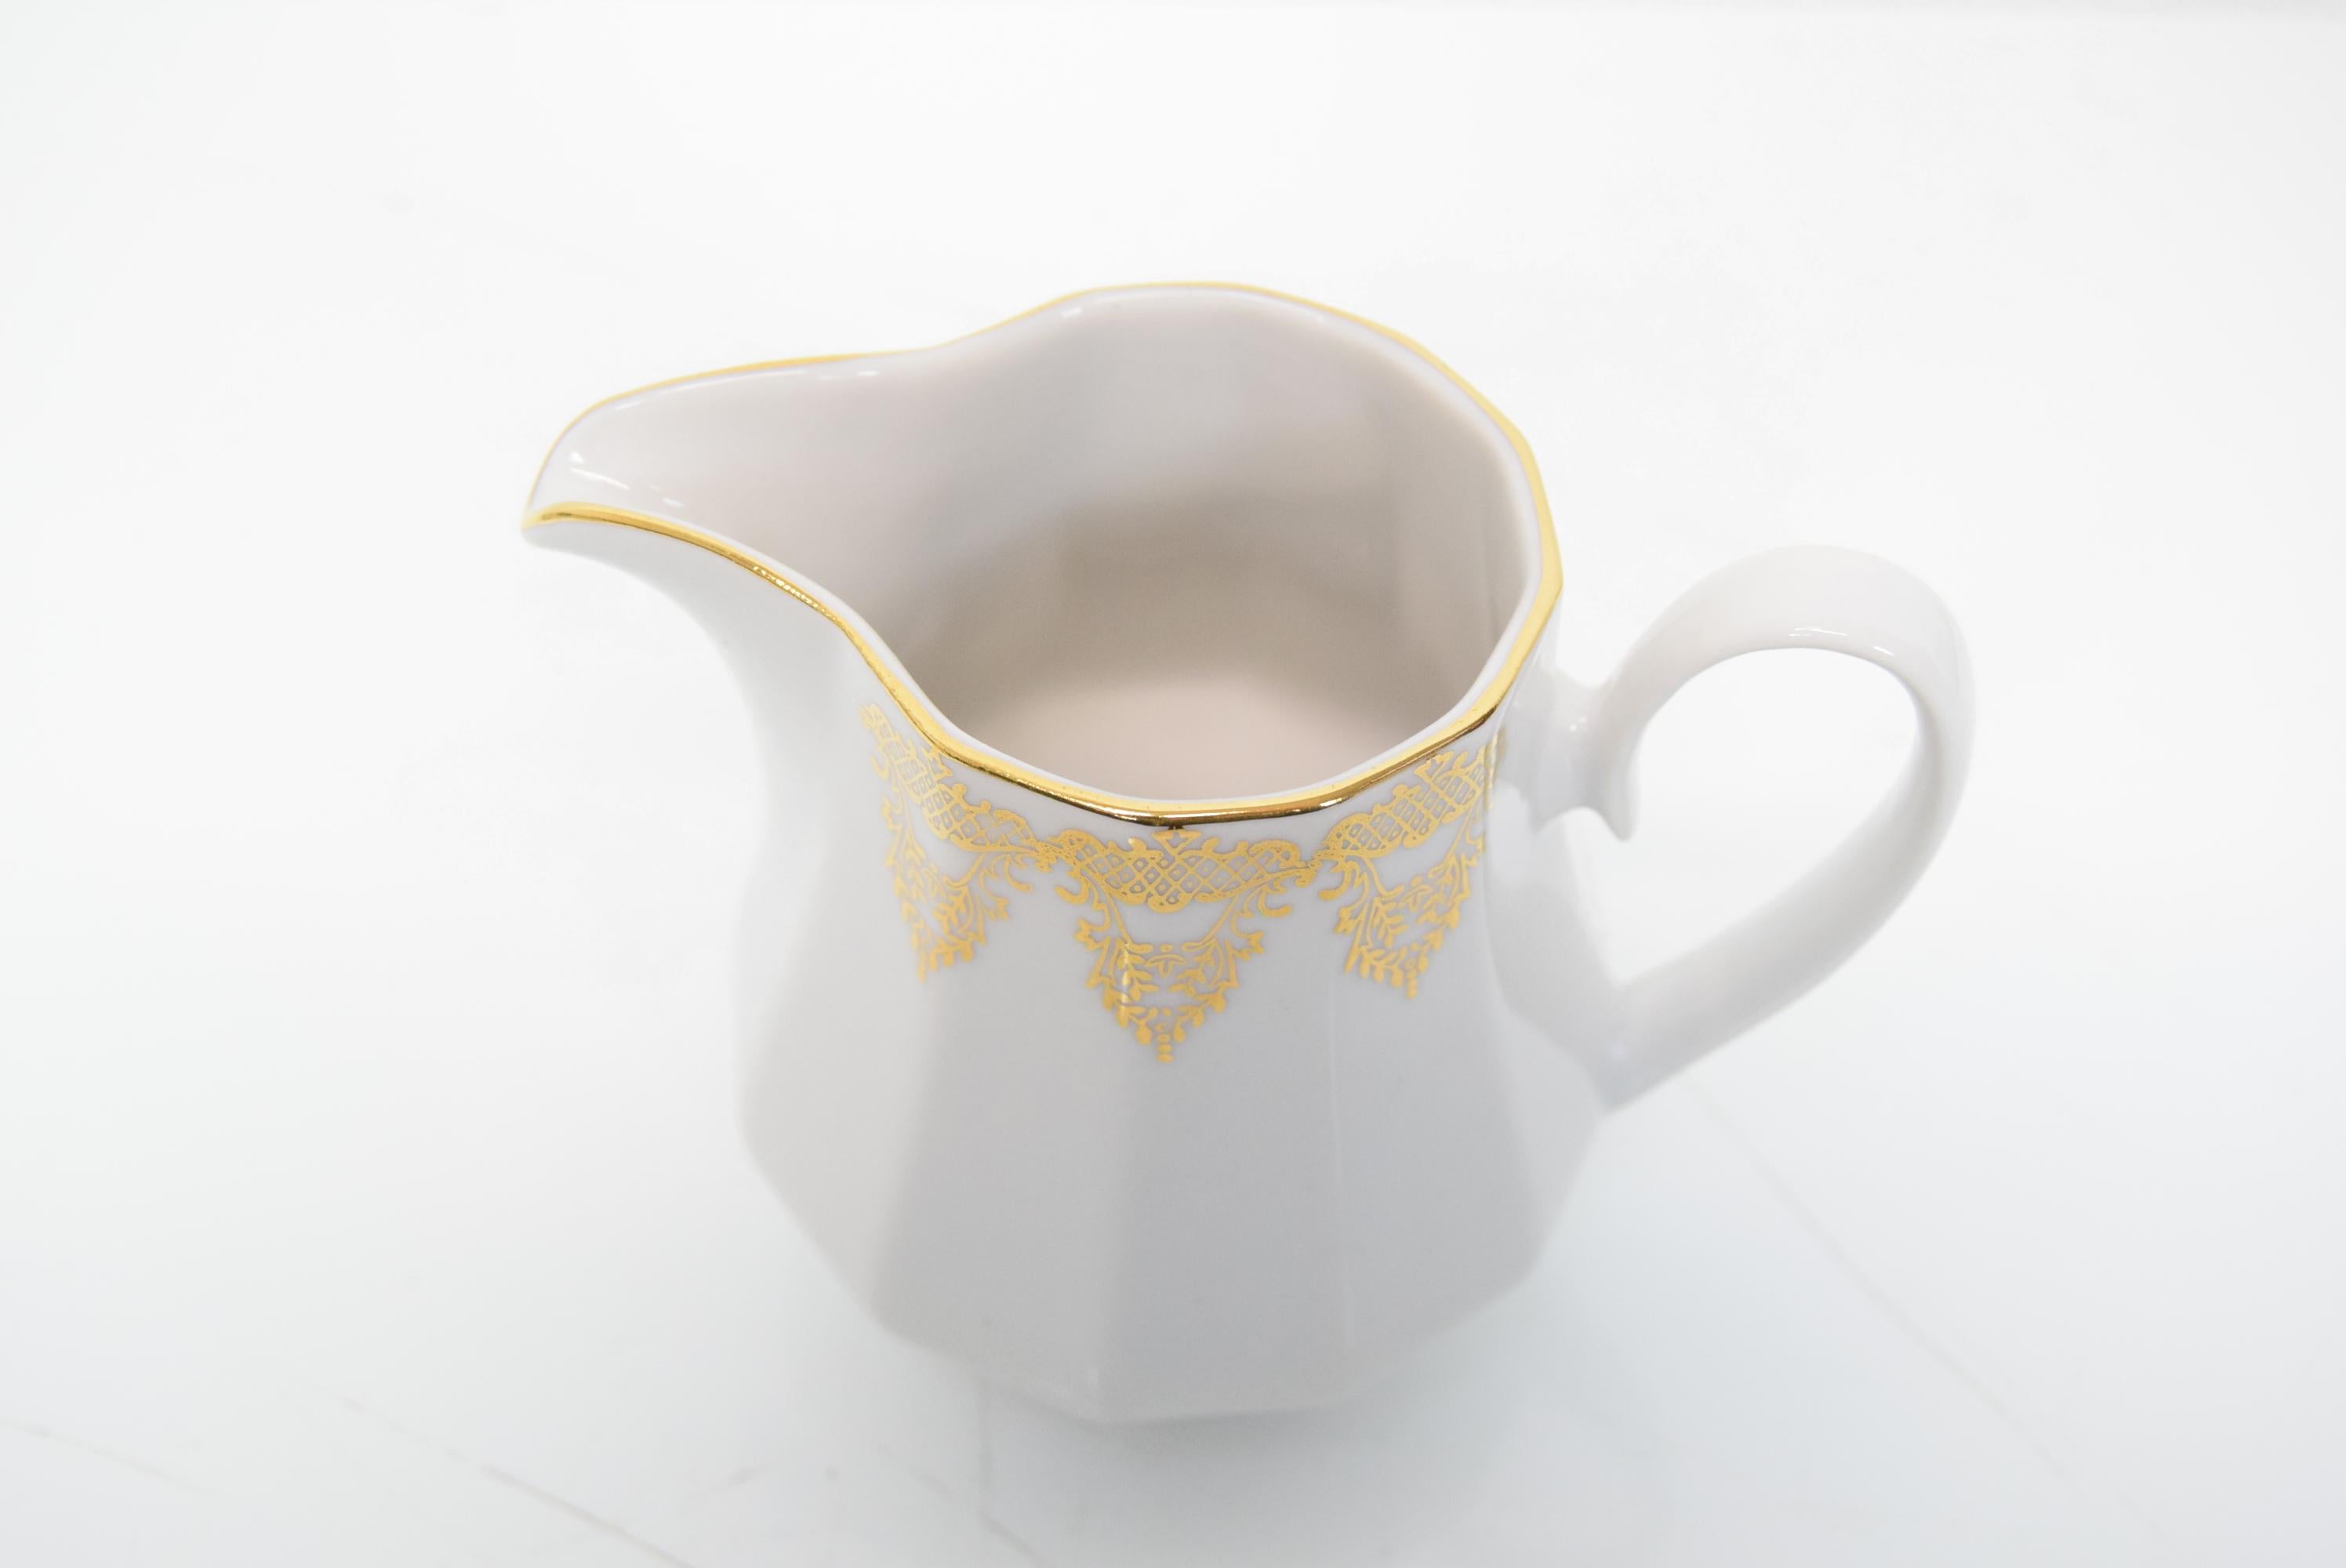 Set Porcelain for Tea or Coffee, Carlsbad Porcealin by Company Epiag D.F For Sale 10